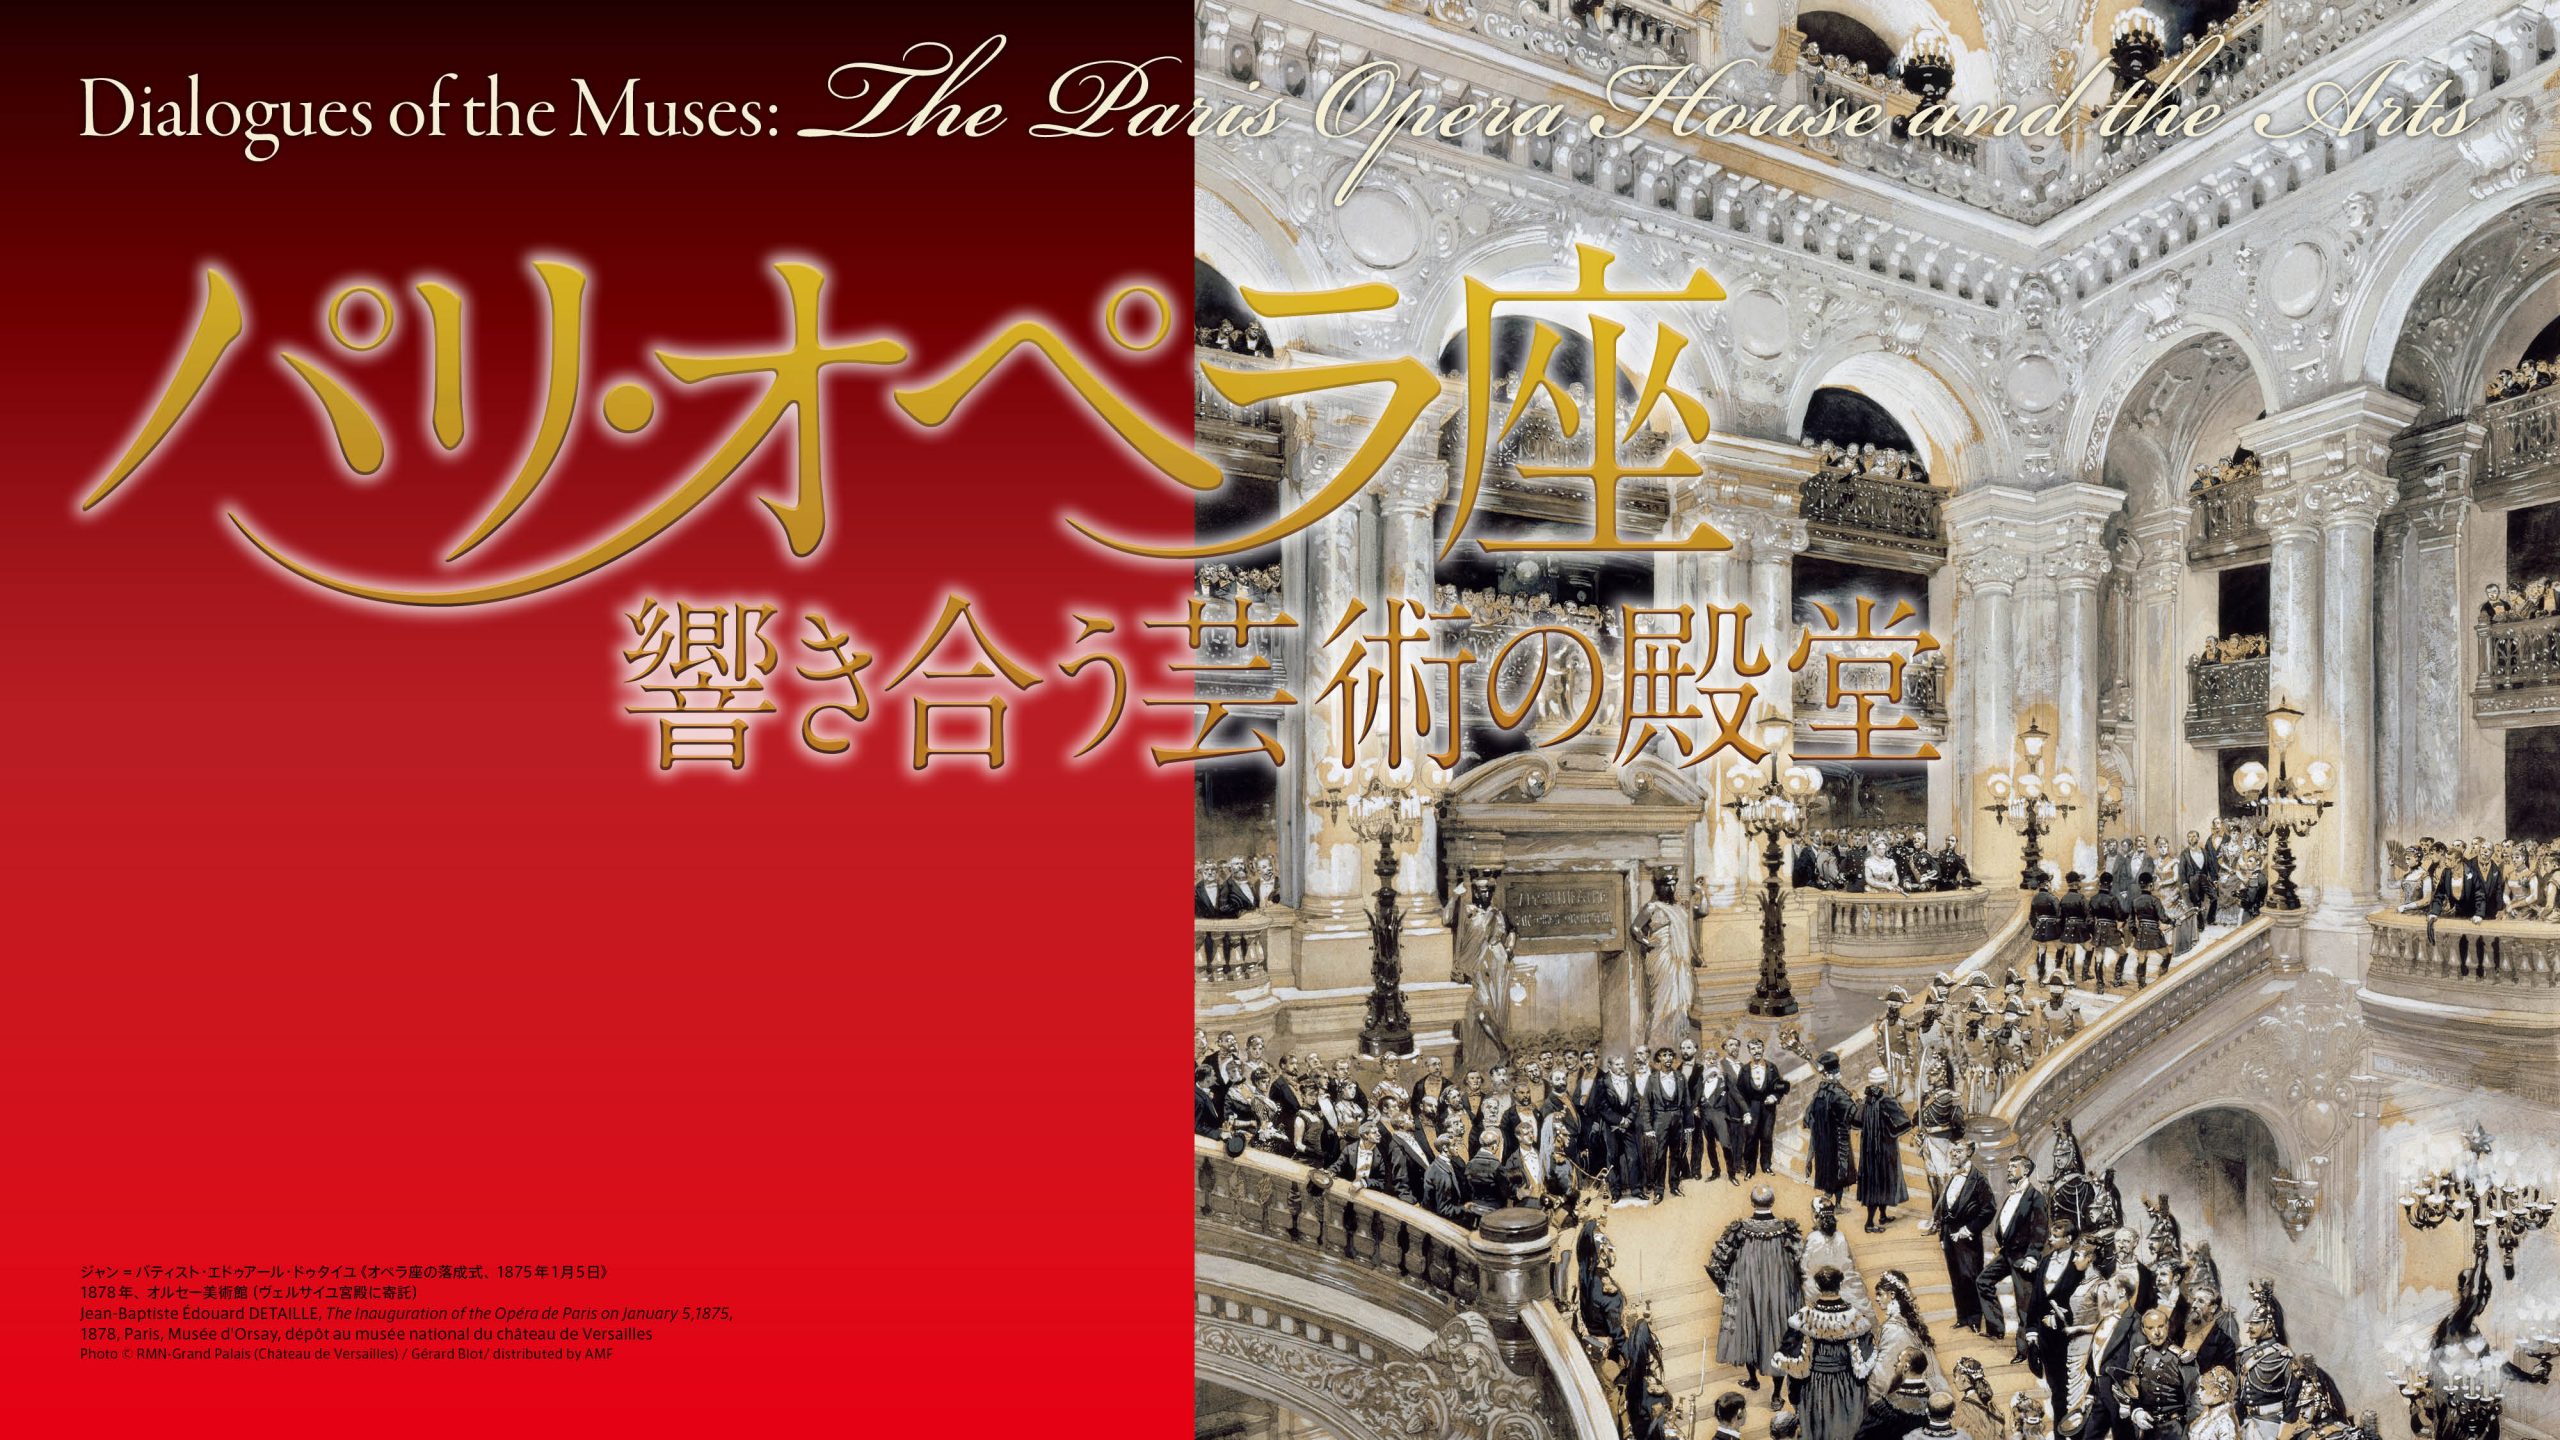 Dialogues of the Muses: The Paris Opera House and the Arts